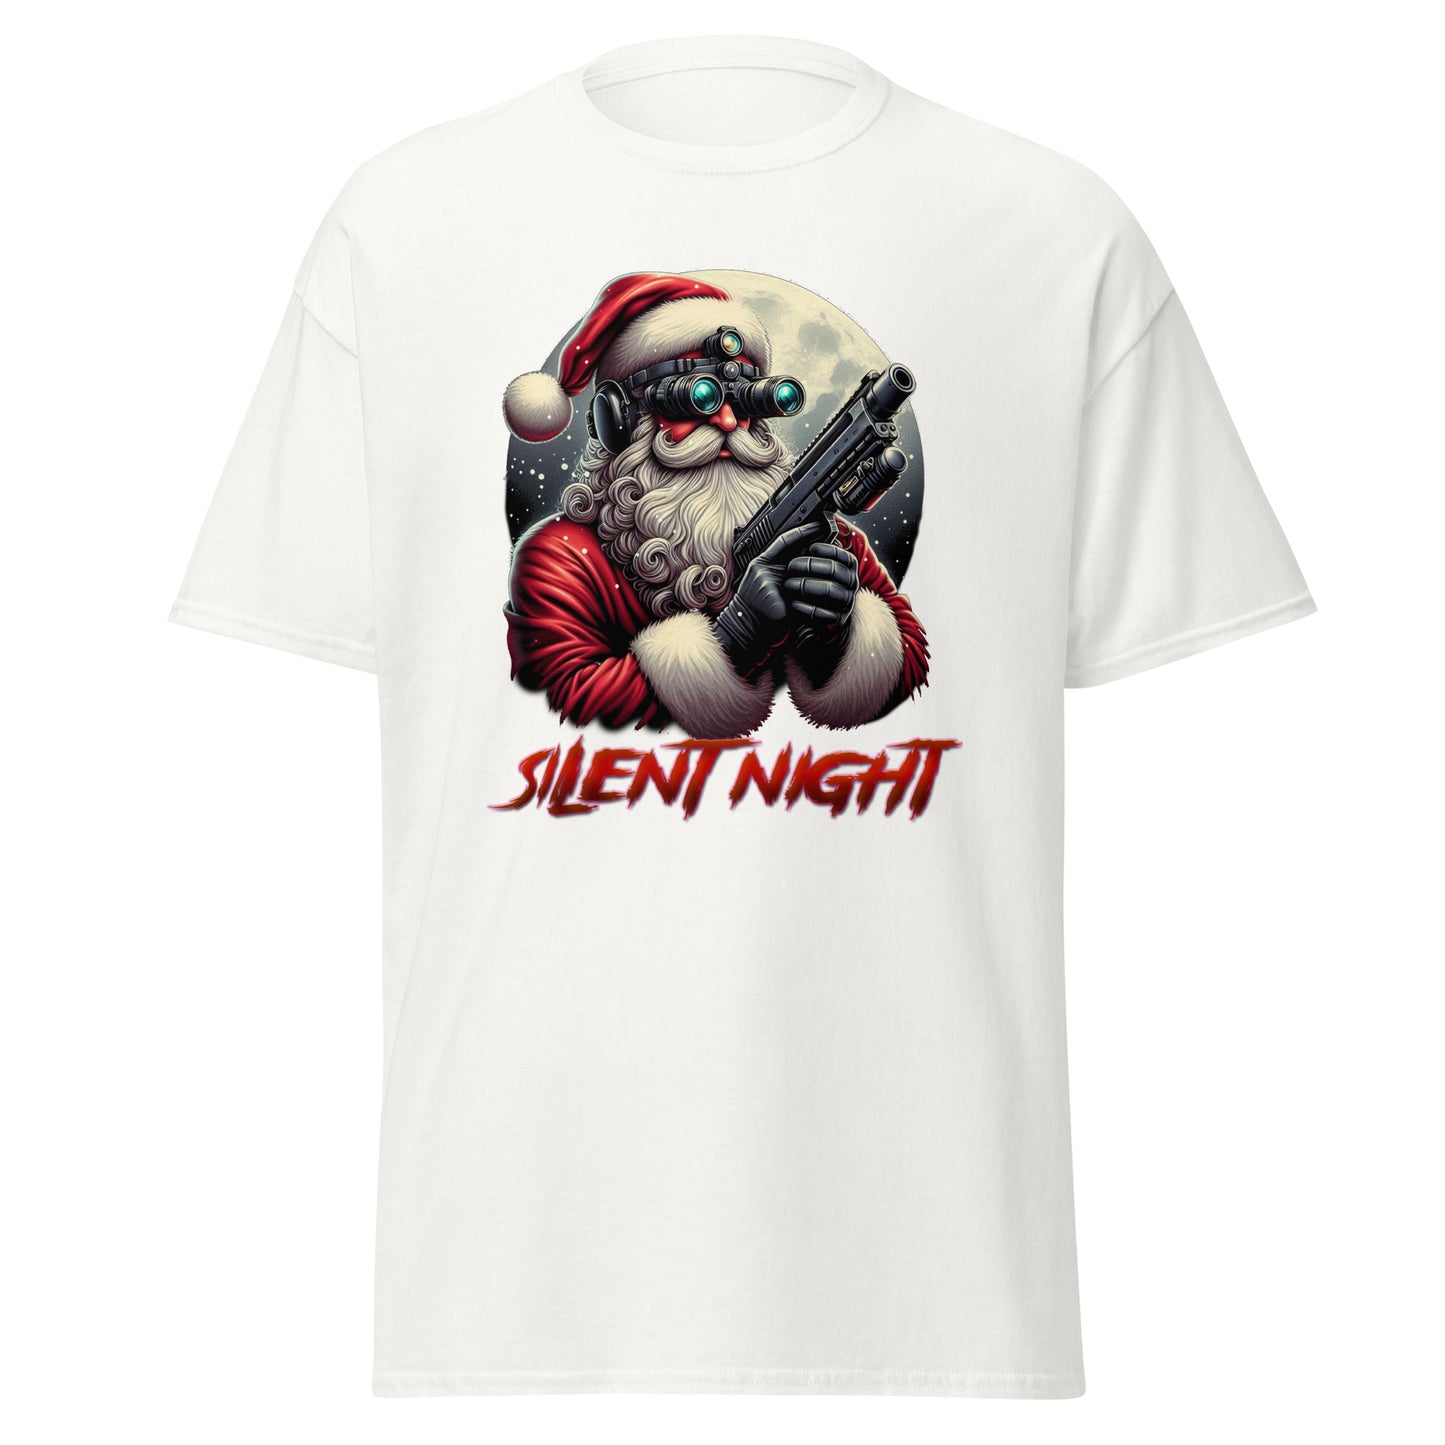 Embrace Tranquility with Our Silent Night T-Shirt - Stylish and Serene Apparel